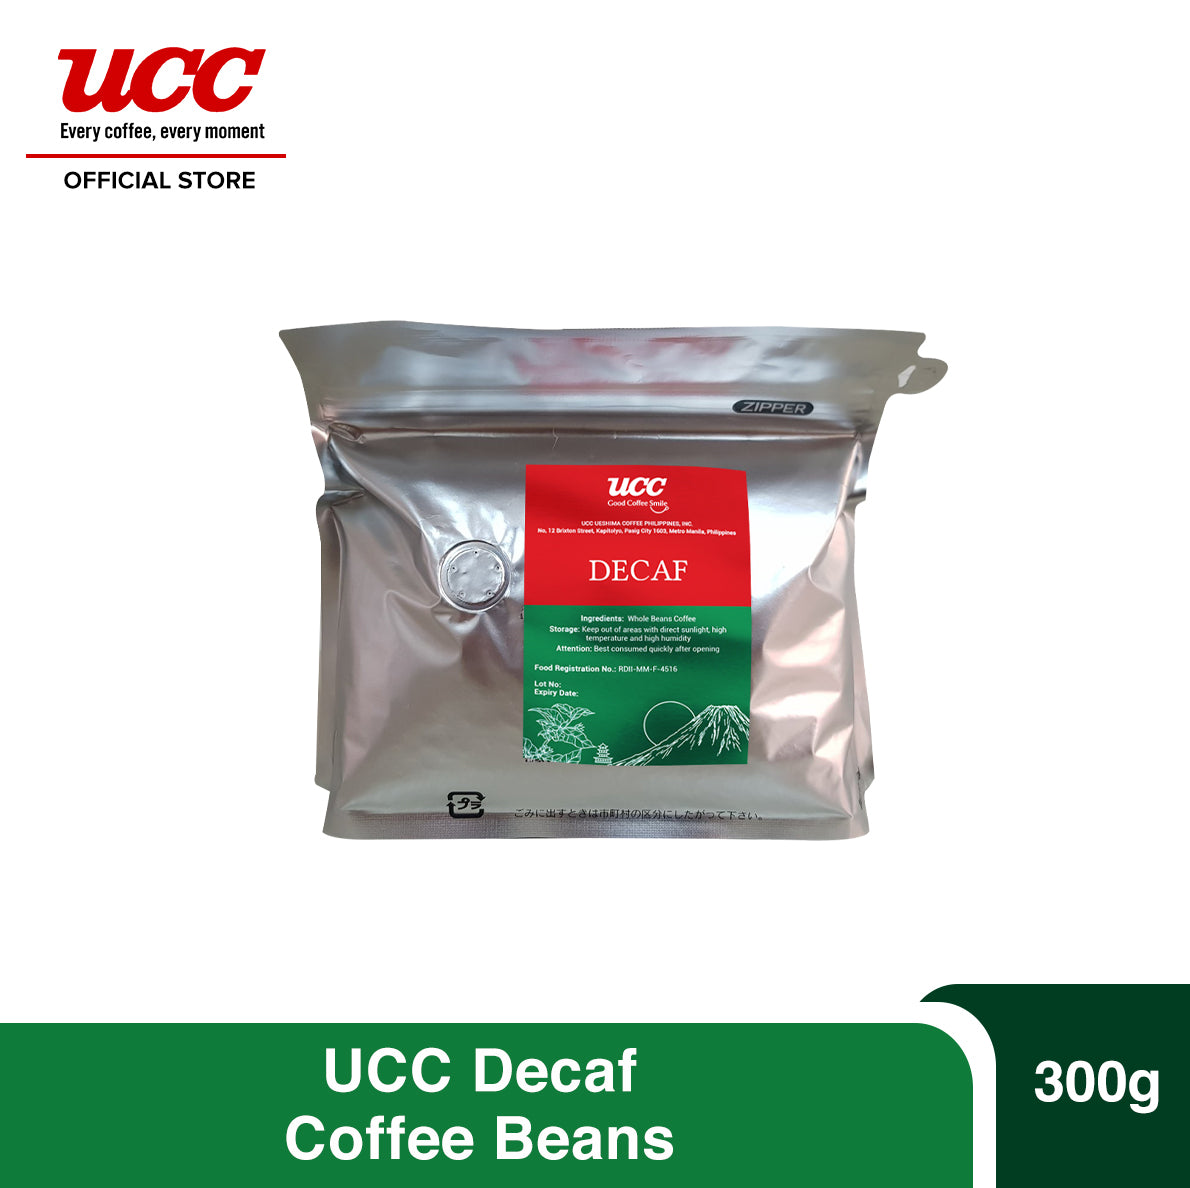 UCC Decaf Roasted Whole Coffee Beans 300g